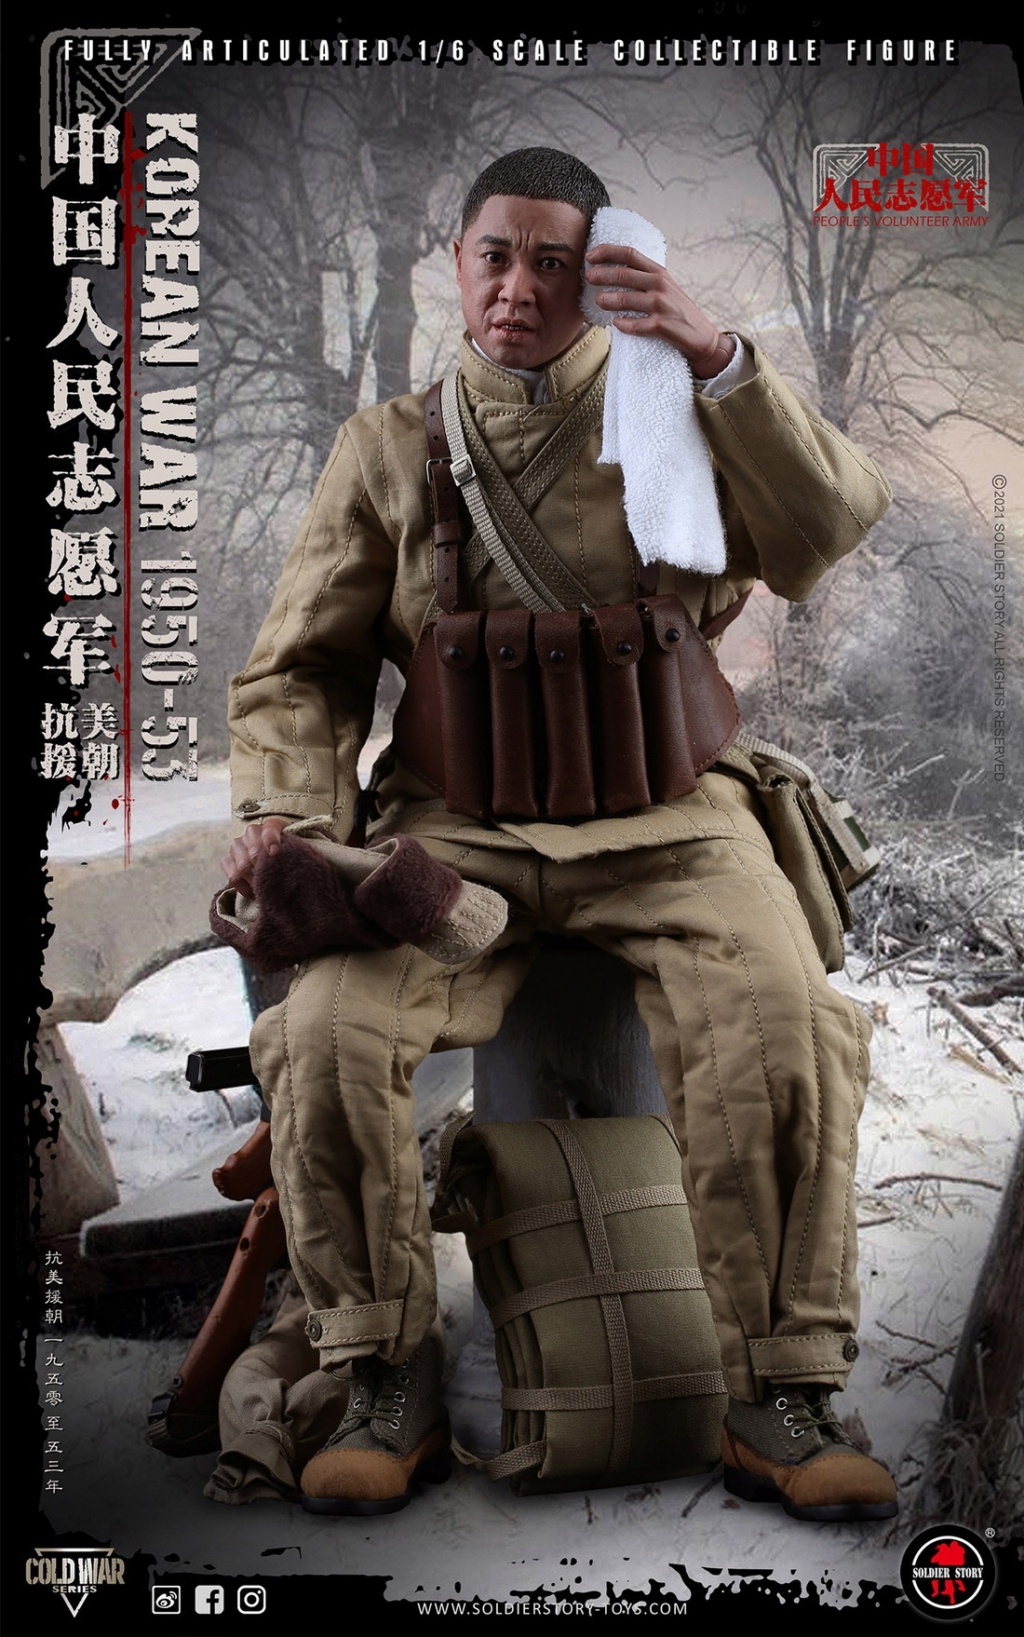 NEW PRODUCT: SOLDIER STORY: 1/6 Chinese People’s Volunteers 1950-53 Collectible Action Figure (#SS-124) 10e63f10